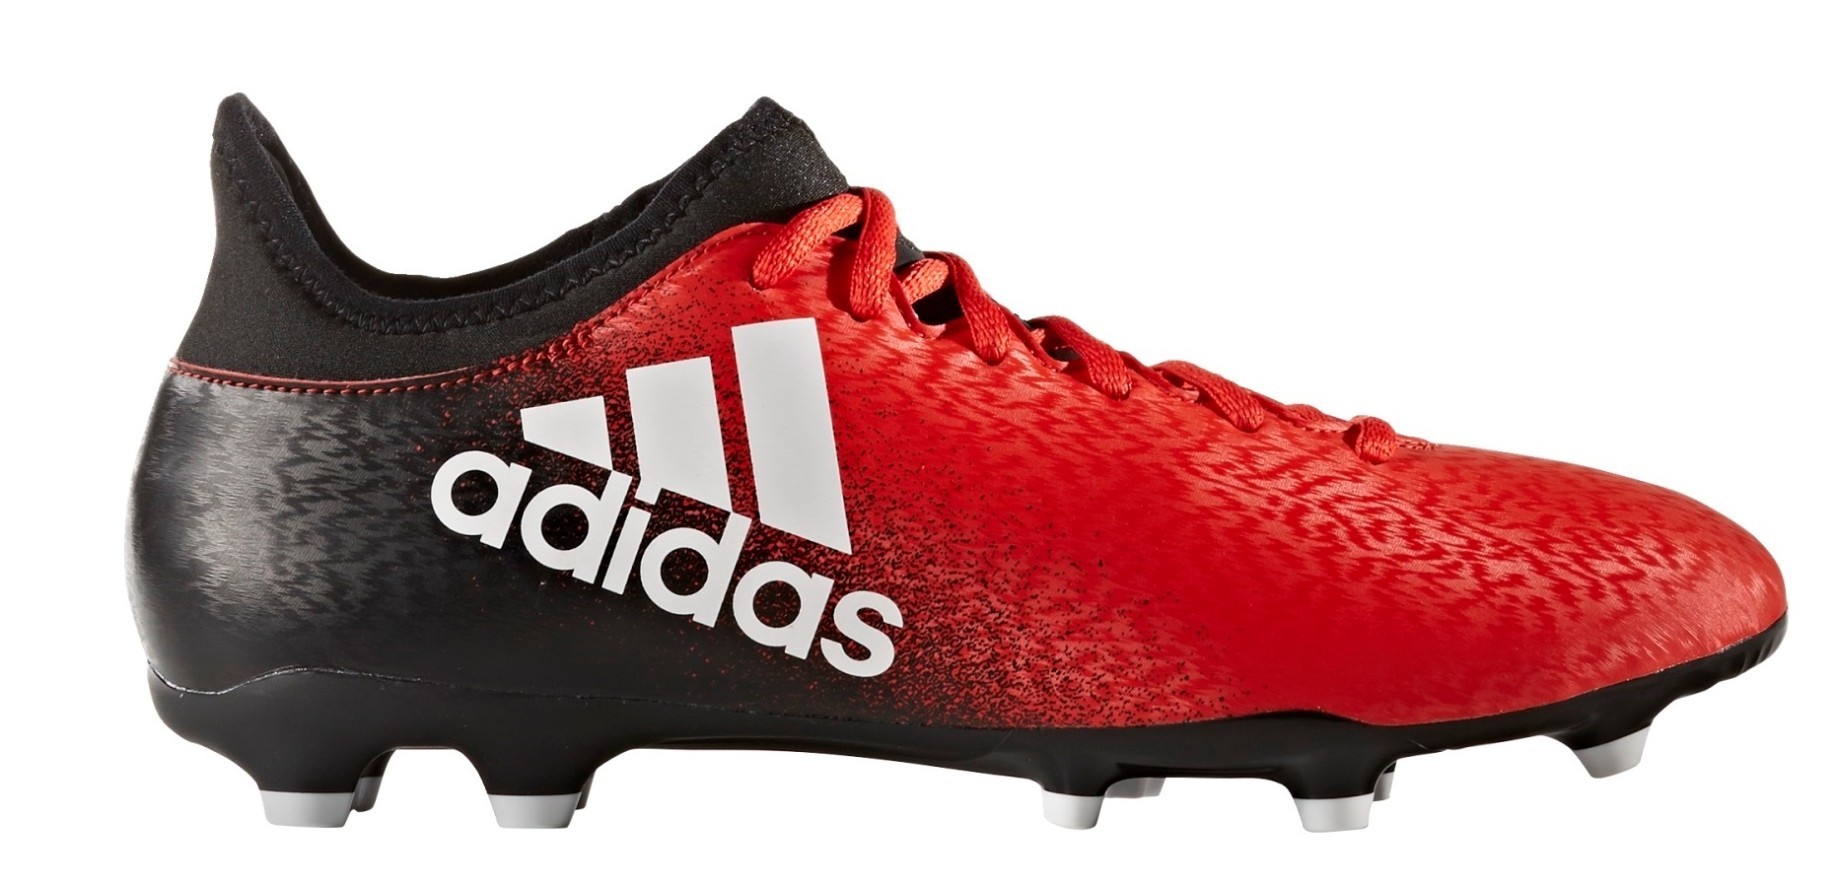 adidas x 16.3 red and black